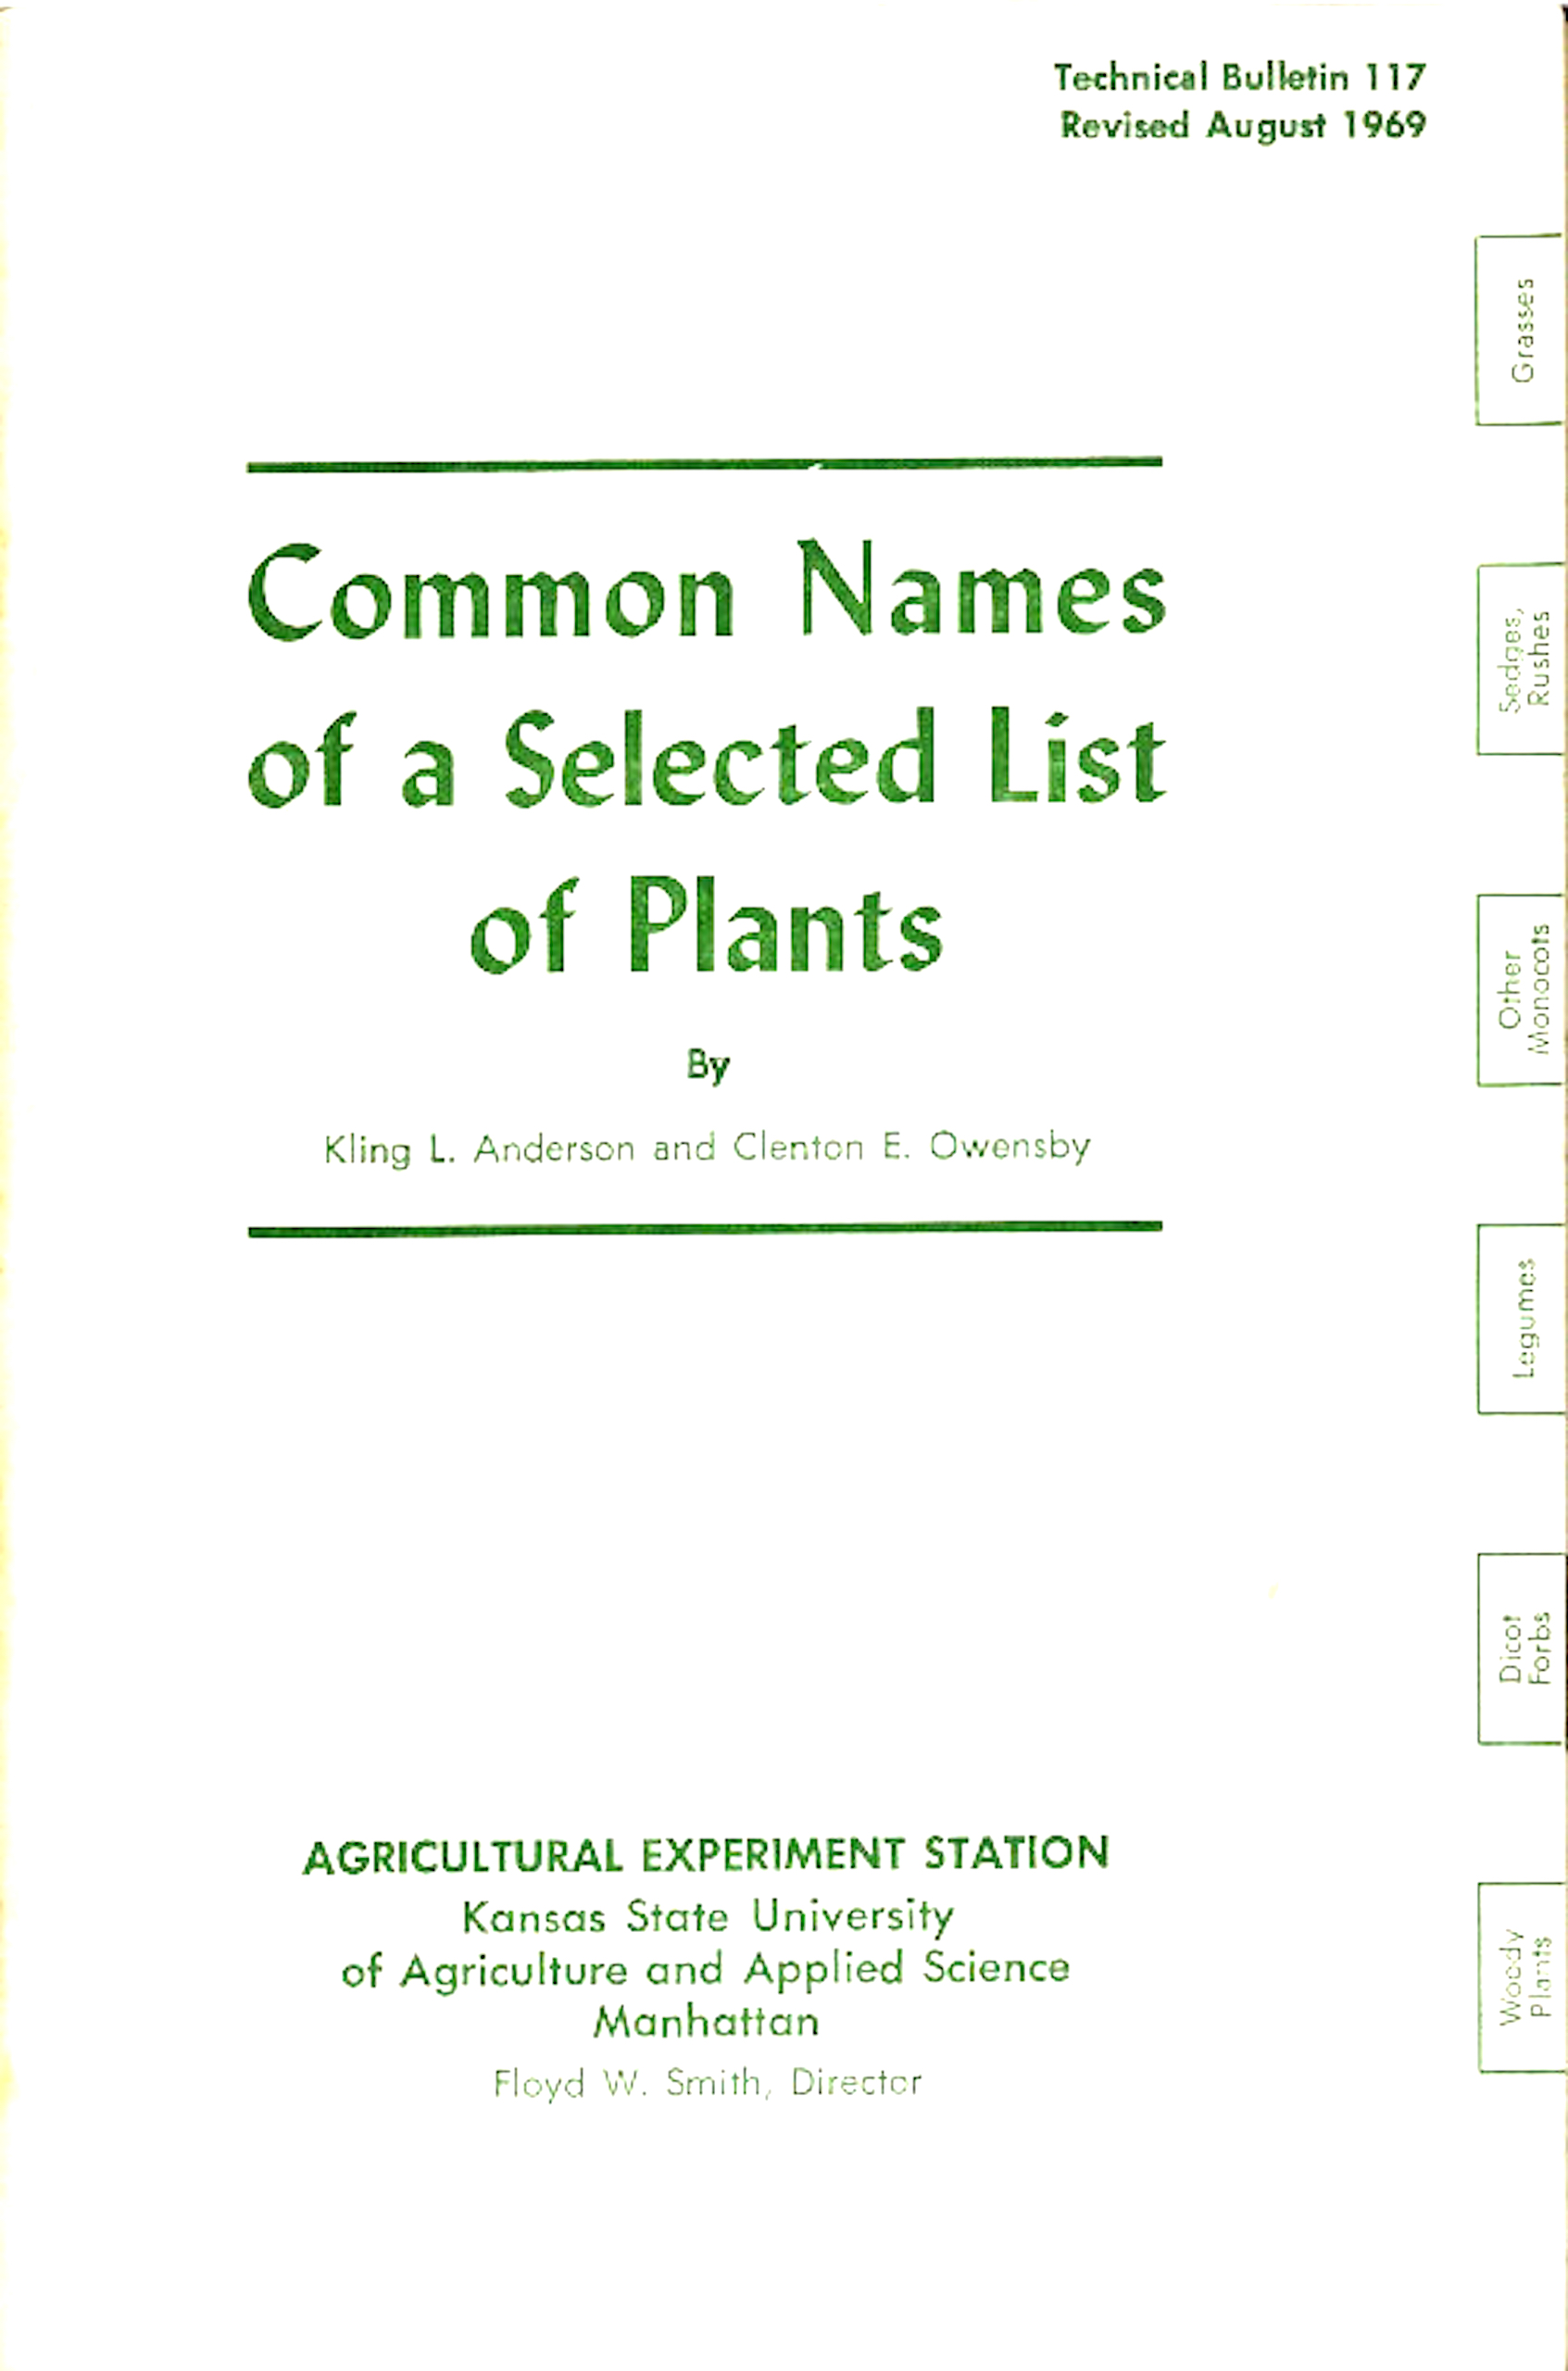 Common names of a selected list of plants